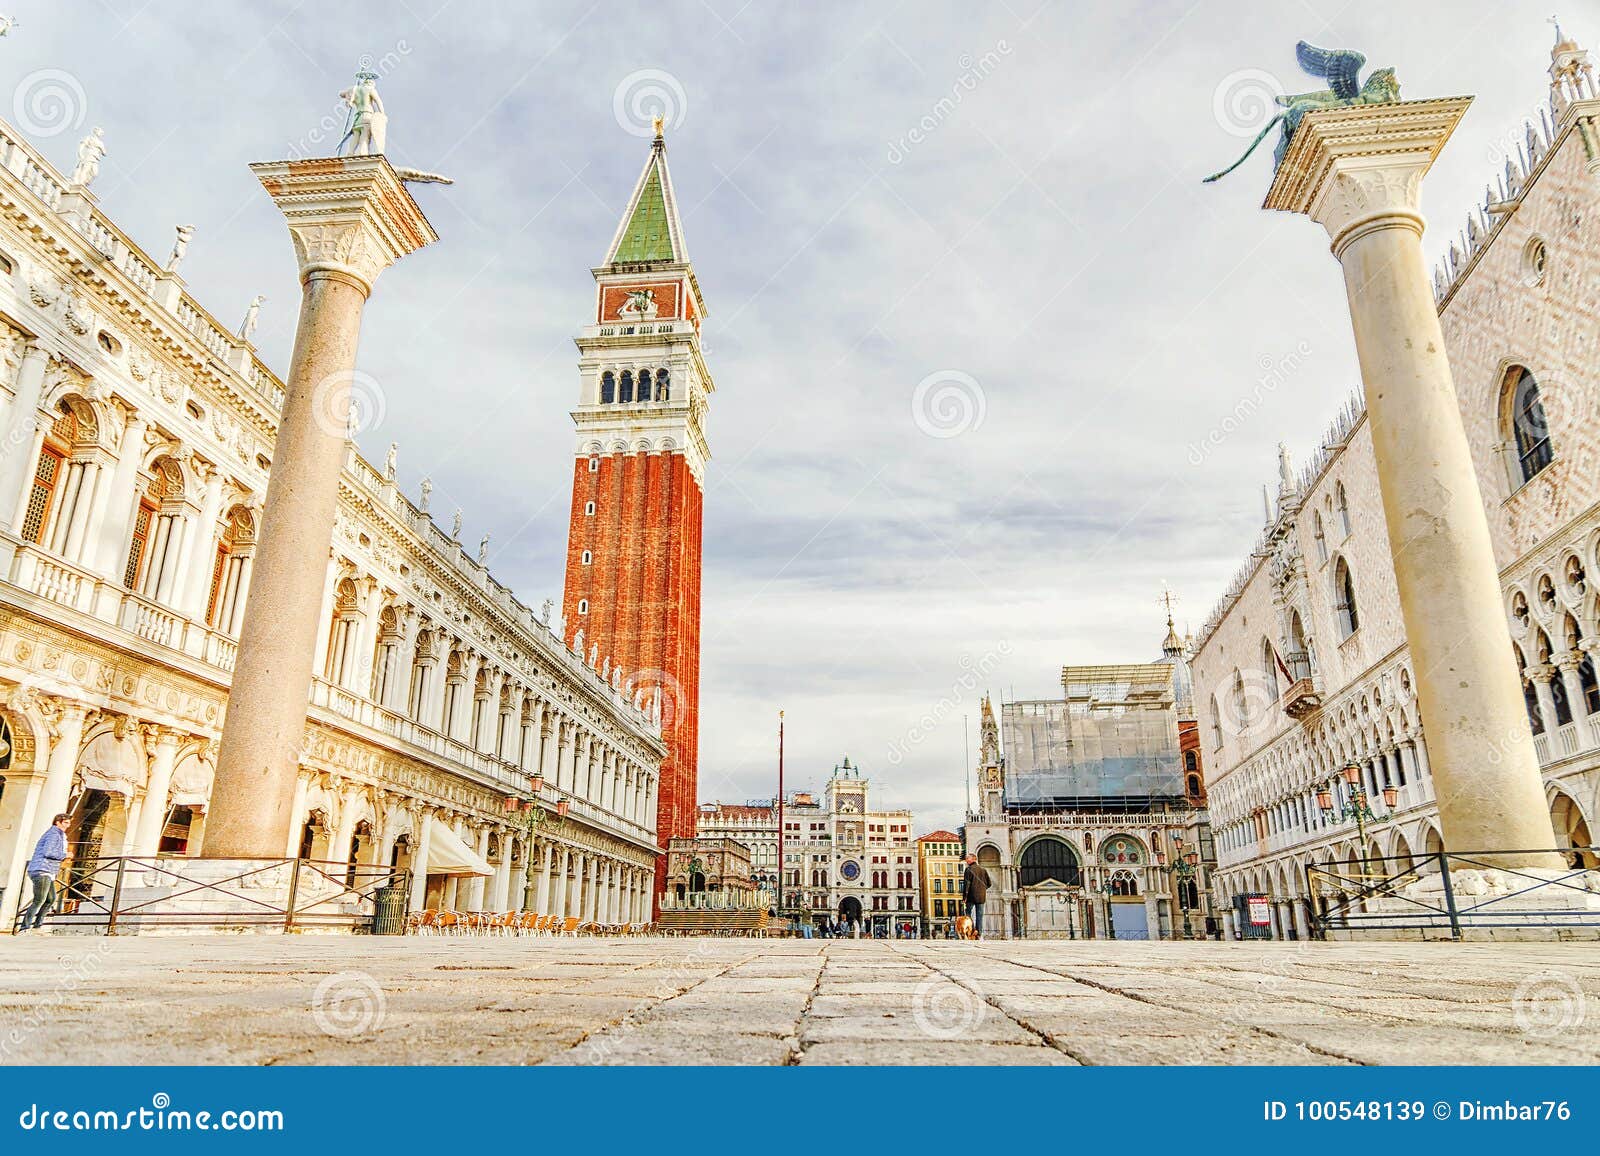 San Marco Square In The Morning Venice Italy Stock Image